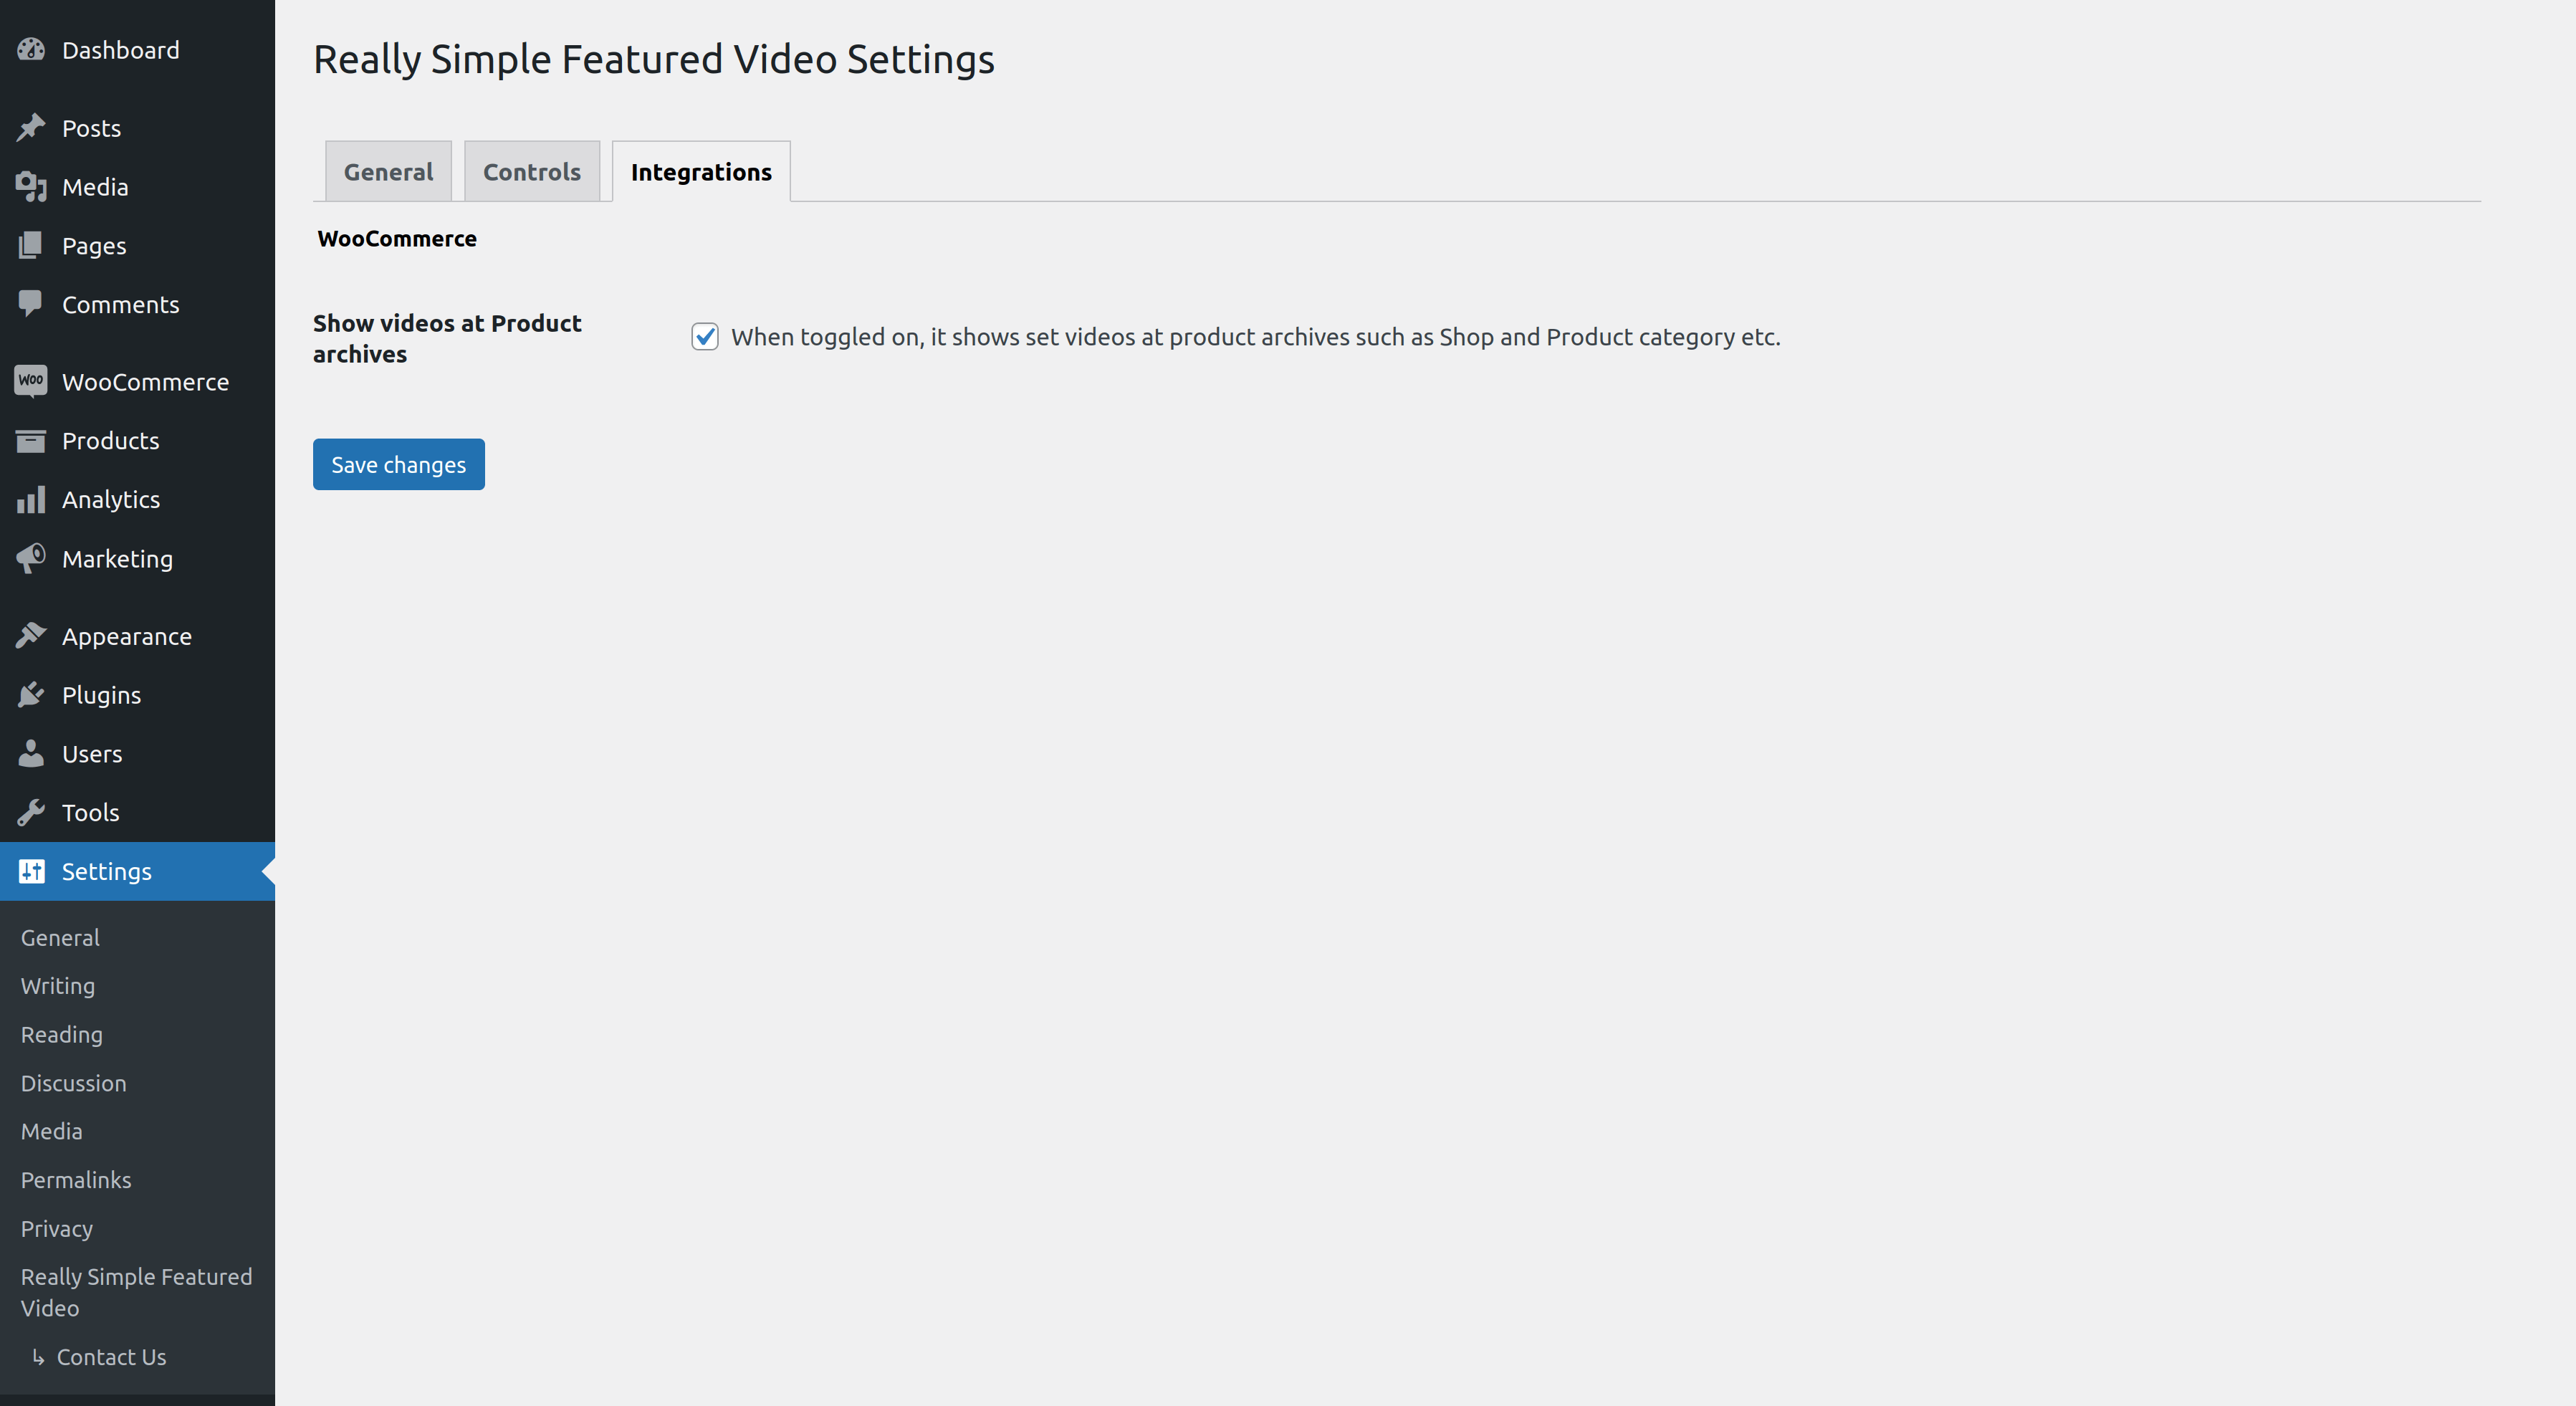 WooCommerce settings page view.